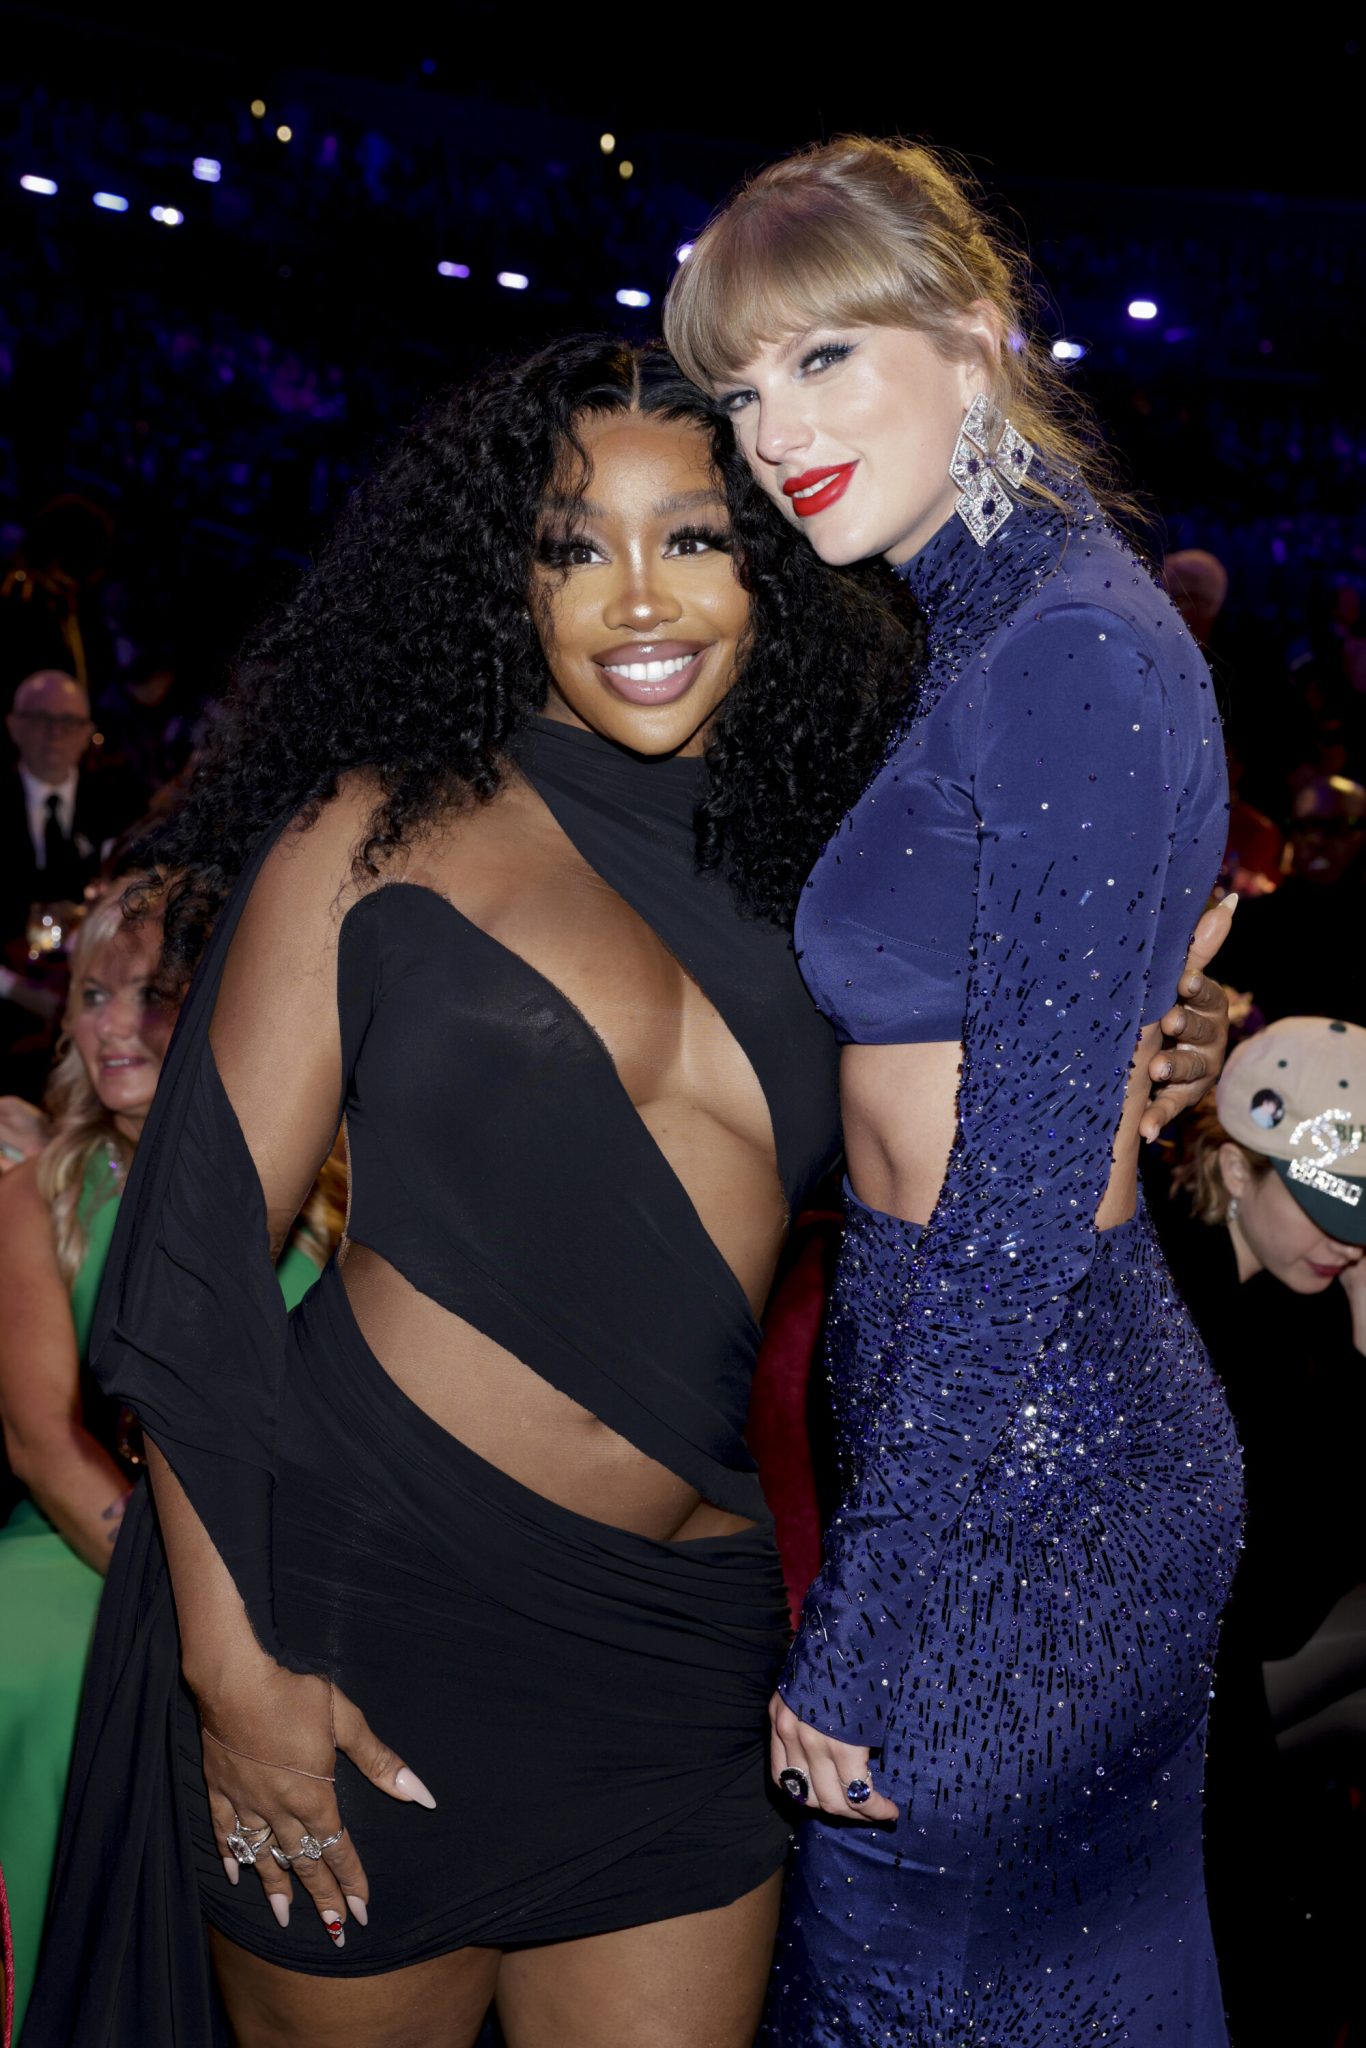 SZA, Taylor Swift Pose For Photo At Grammy Awards Amid Recent Billboard